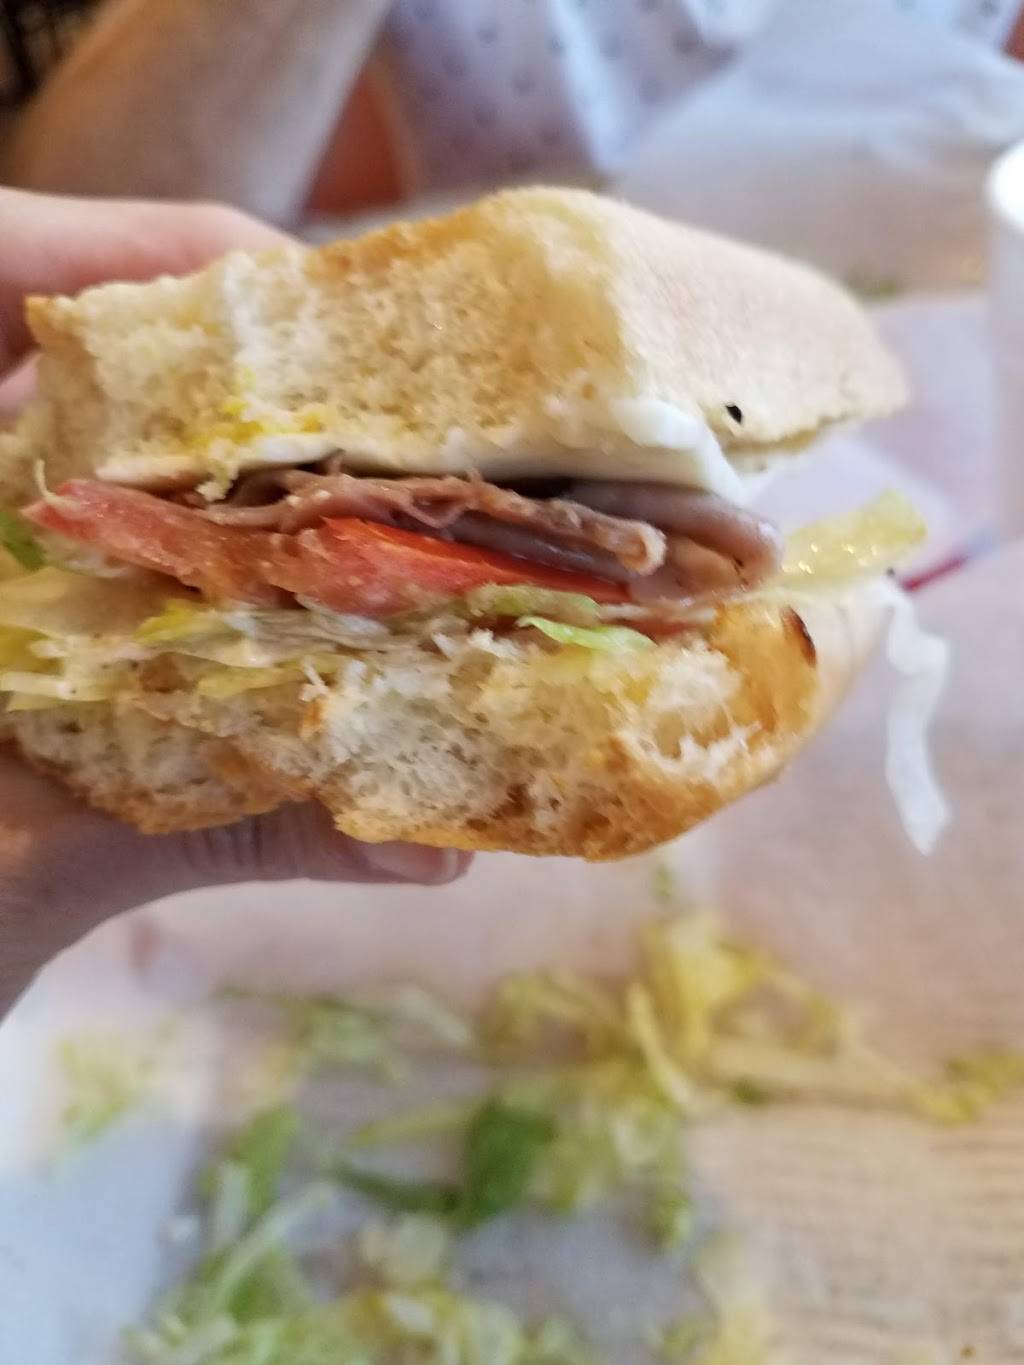 Highland Super Submarine Sandwich Shop | meal takeaway | 3316 Summer Ave, Memphis, TN 38122, USA | 9013243728 OR +1 901-324-3728